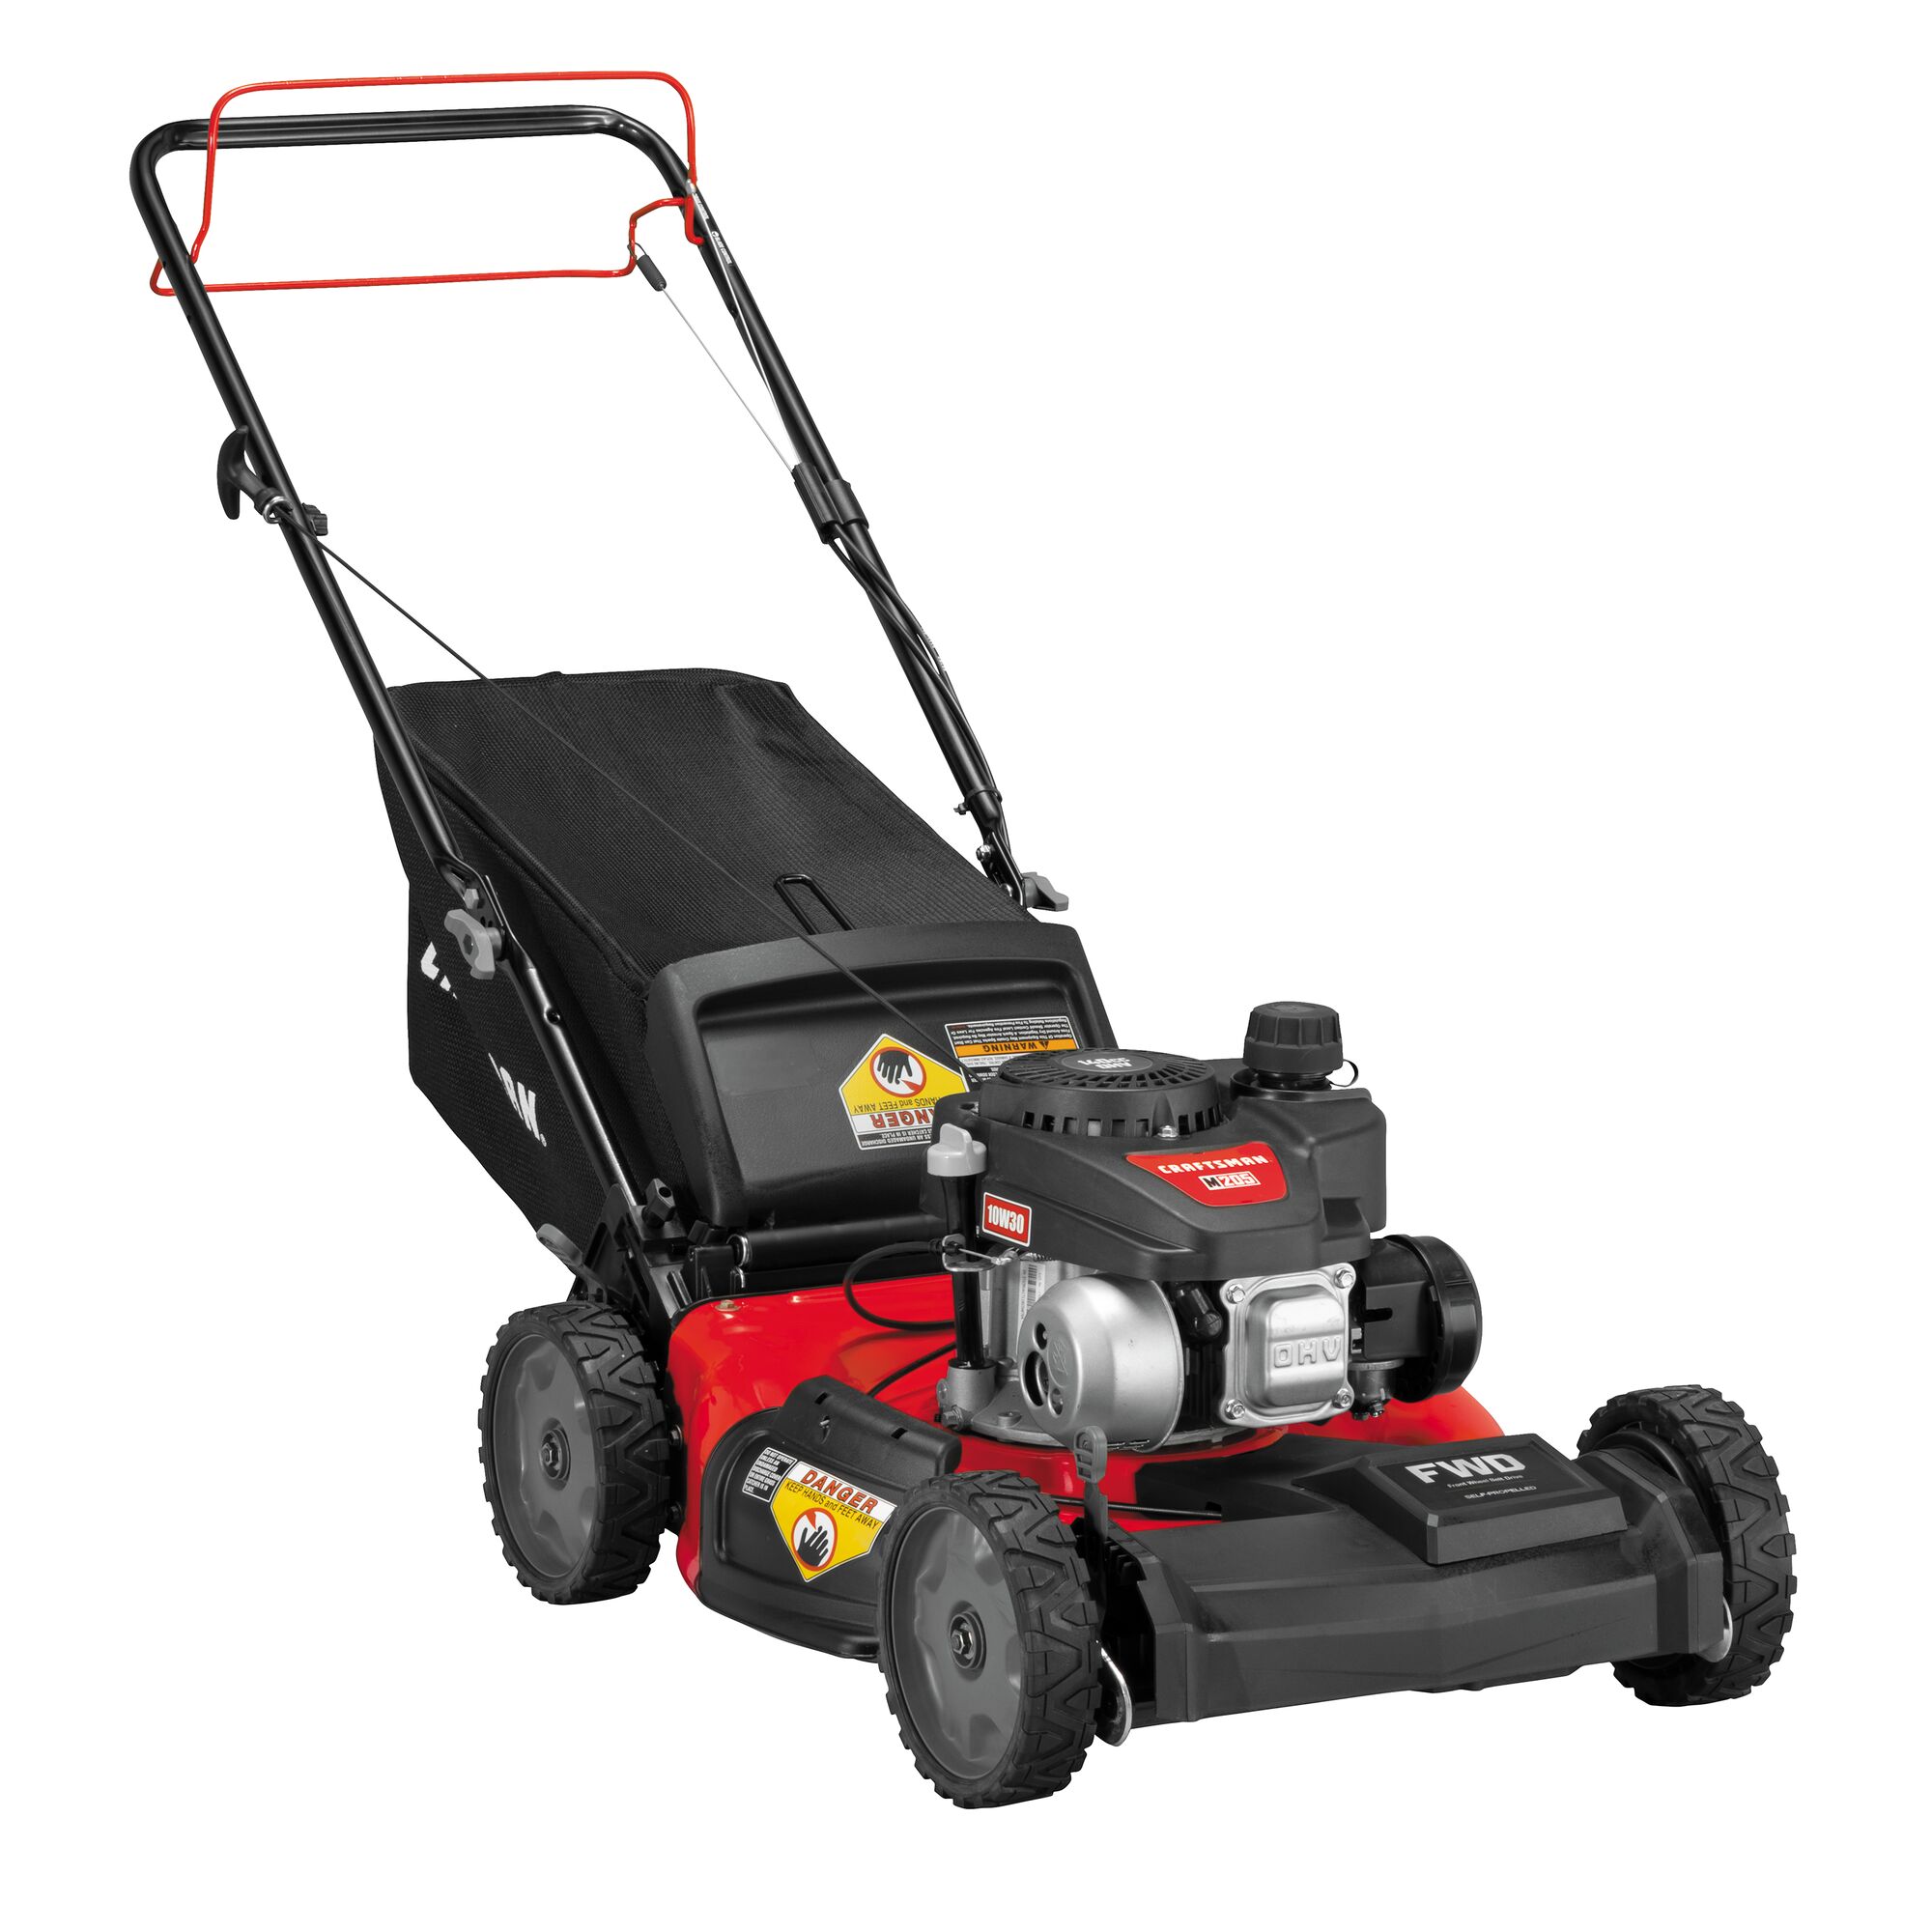 Profile of 21 inch front wheel drive self propelled lawn mower.